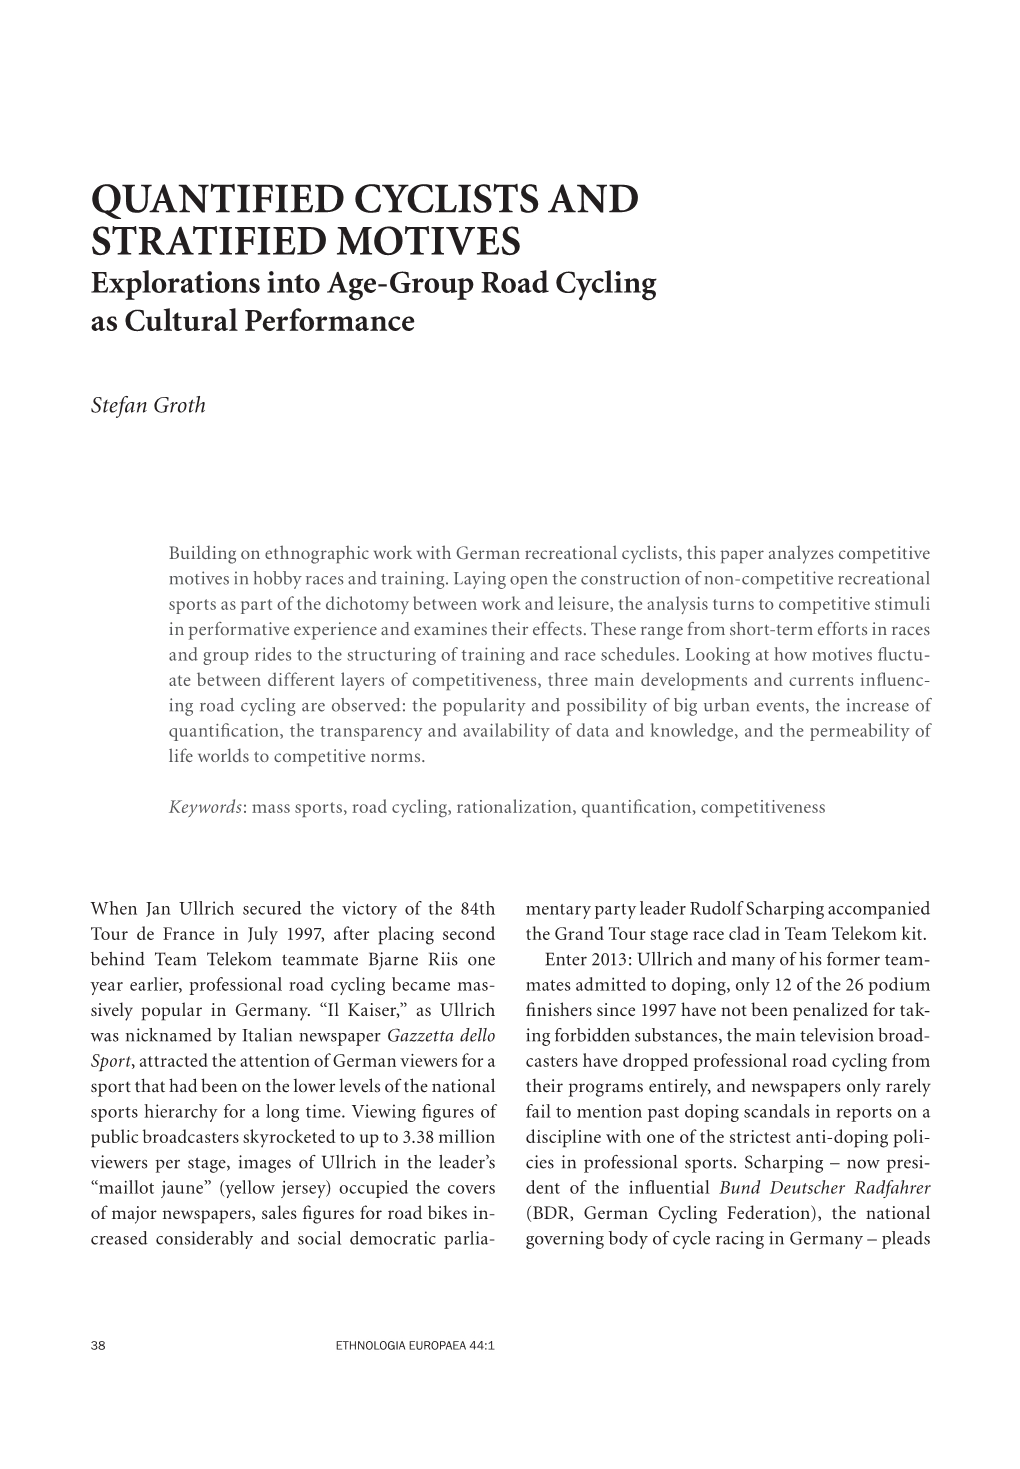 QUANTIFIED CYCLISTS and STRATIFIED MOTIVES Explorations Into Age-Group Road Cycling As Cultural Performance